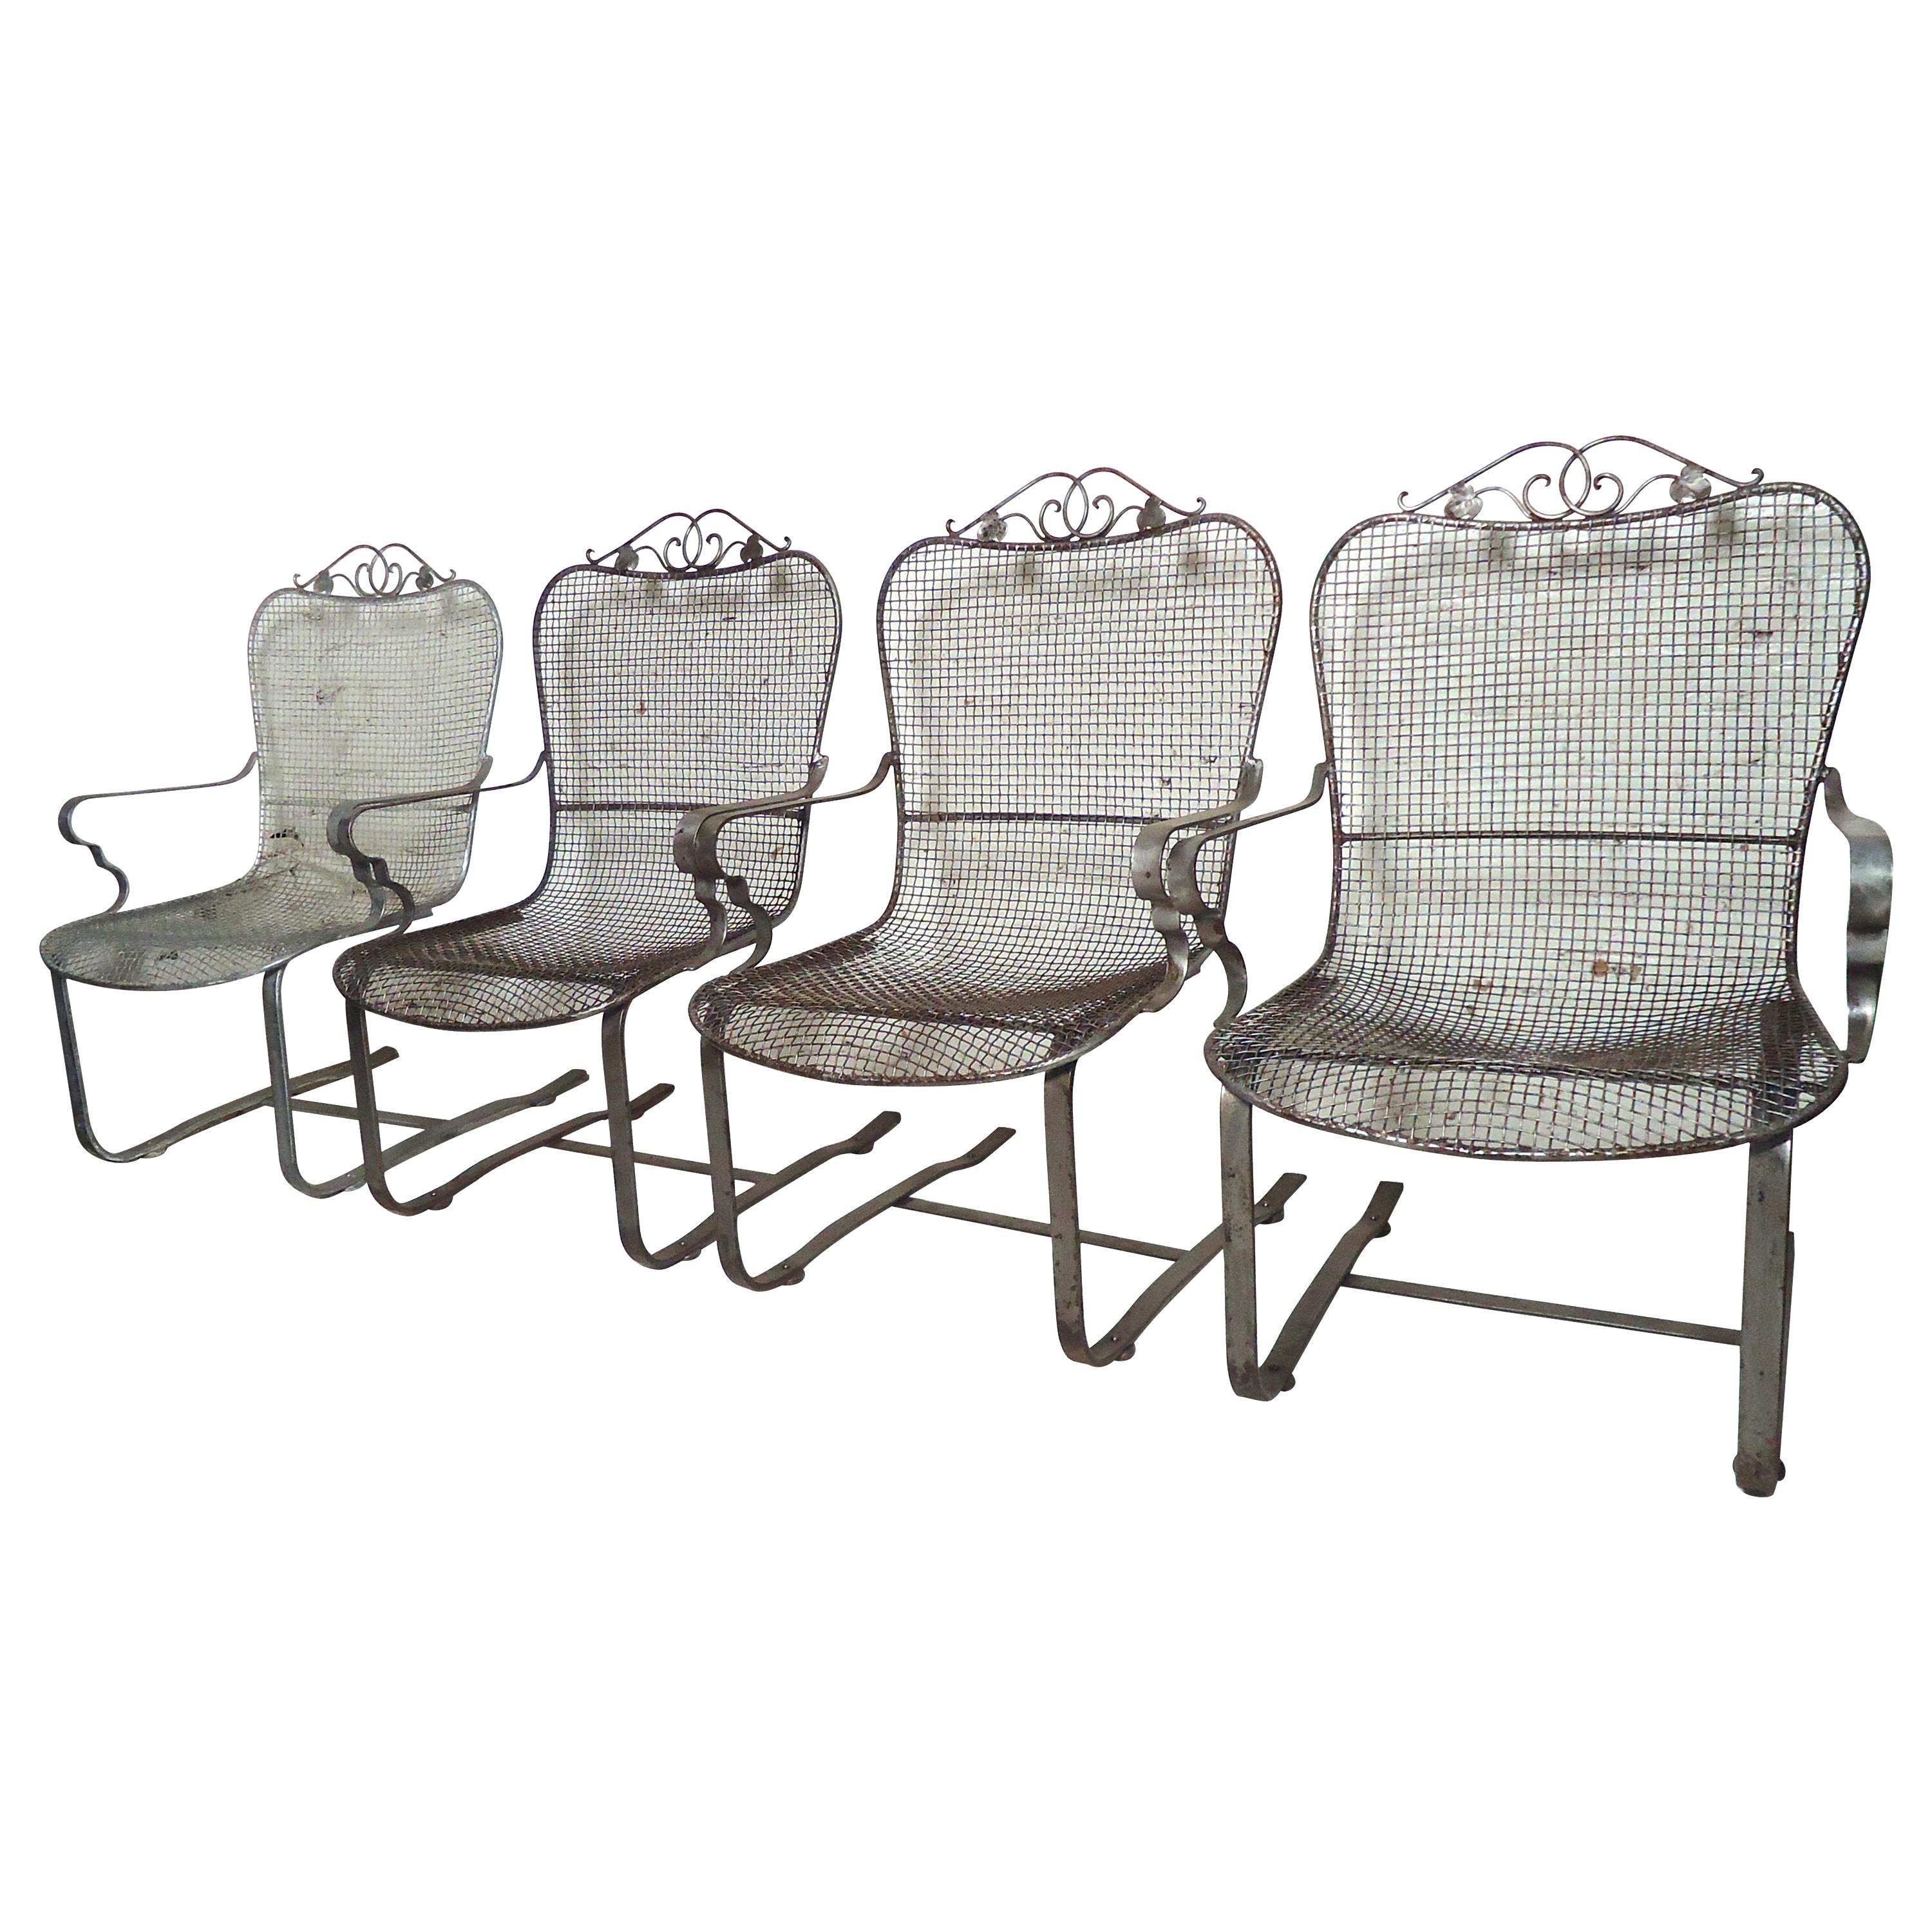 Restored Metal Spring Chairs